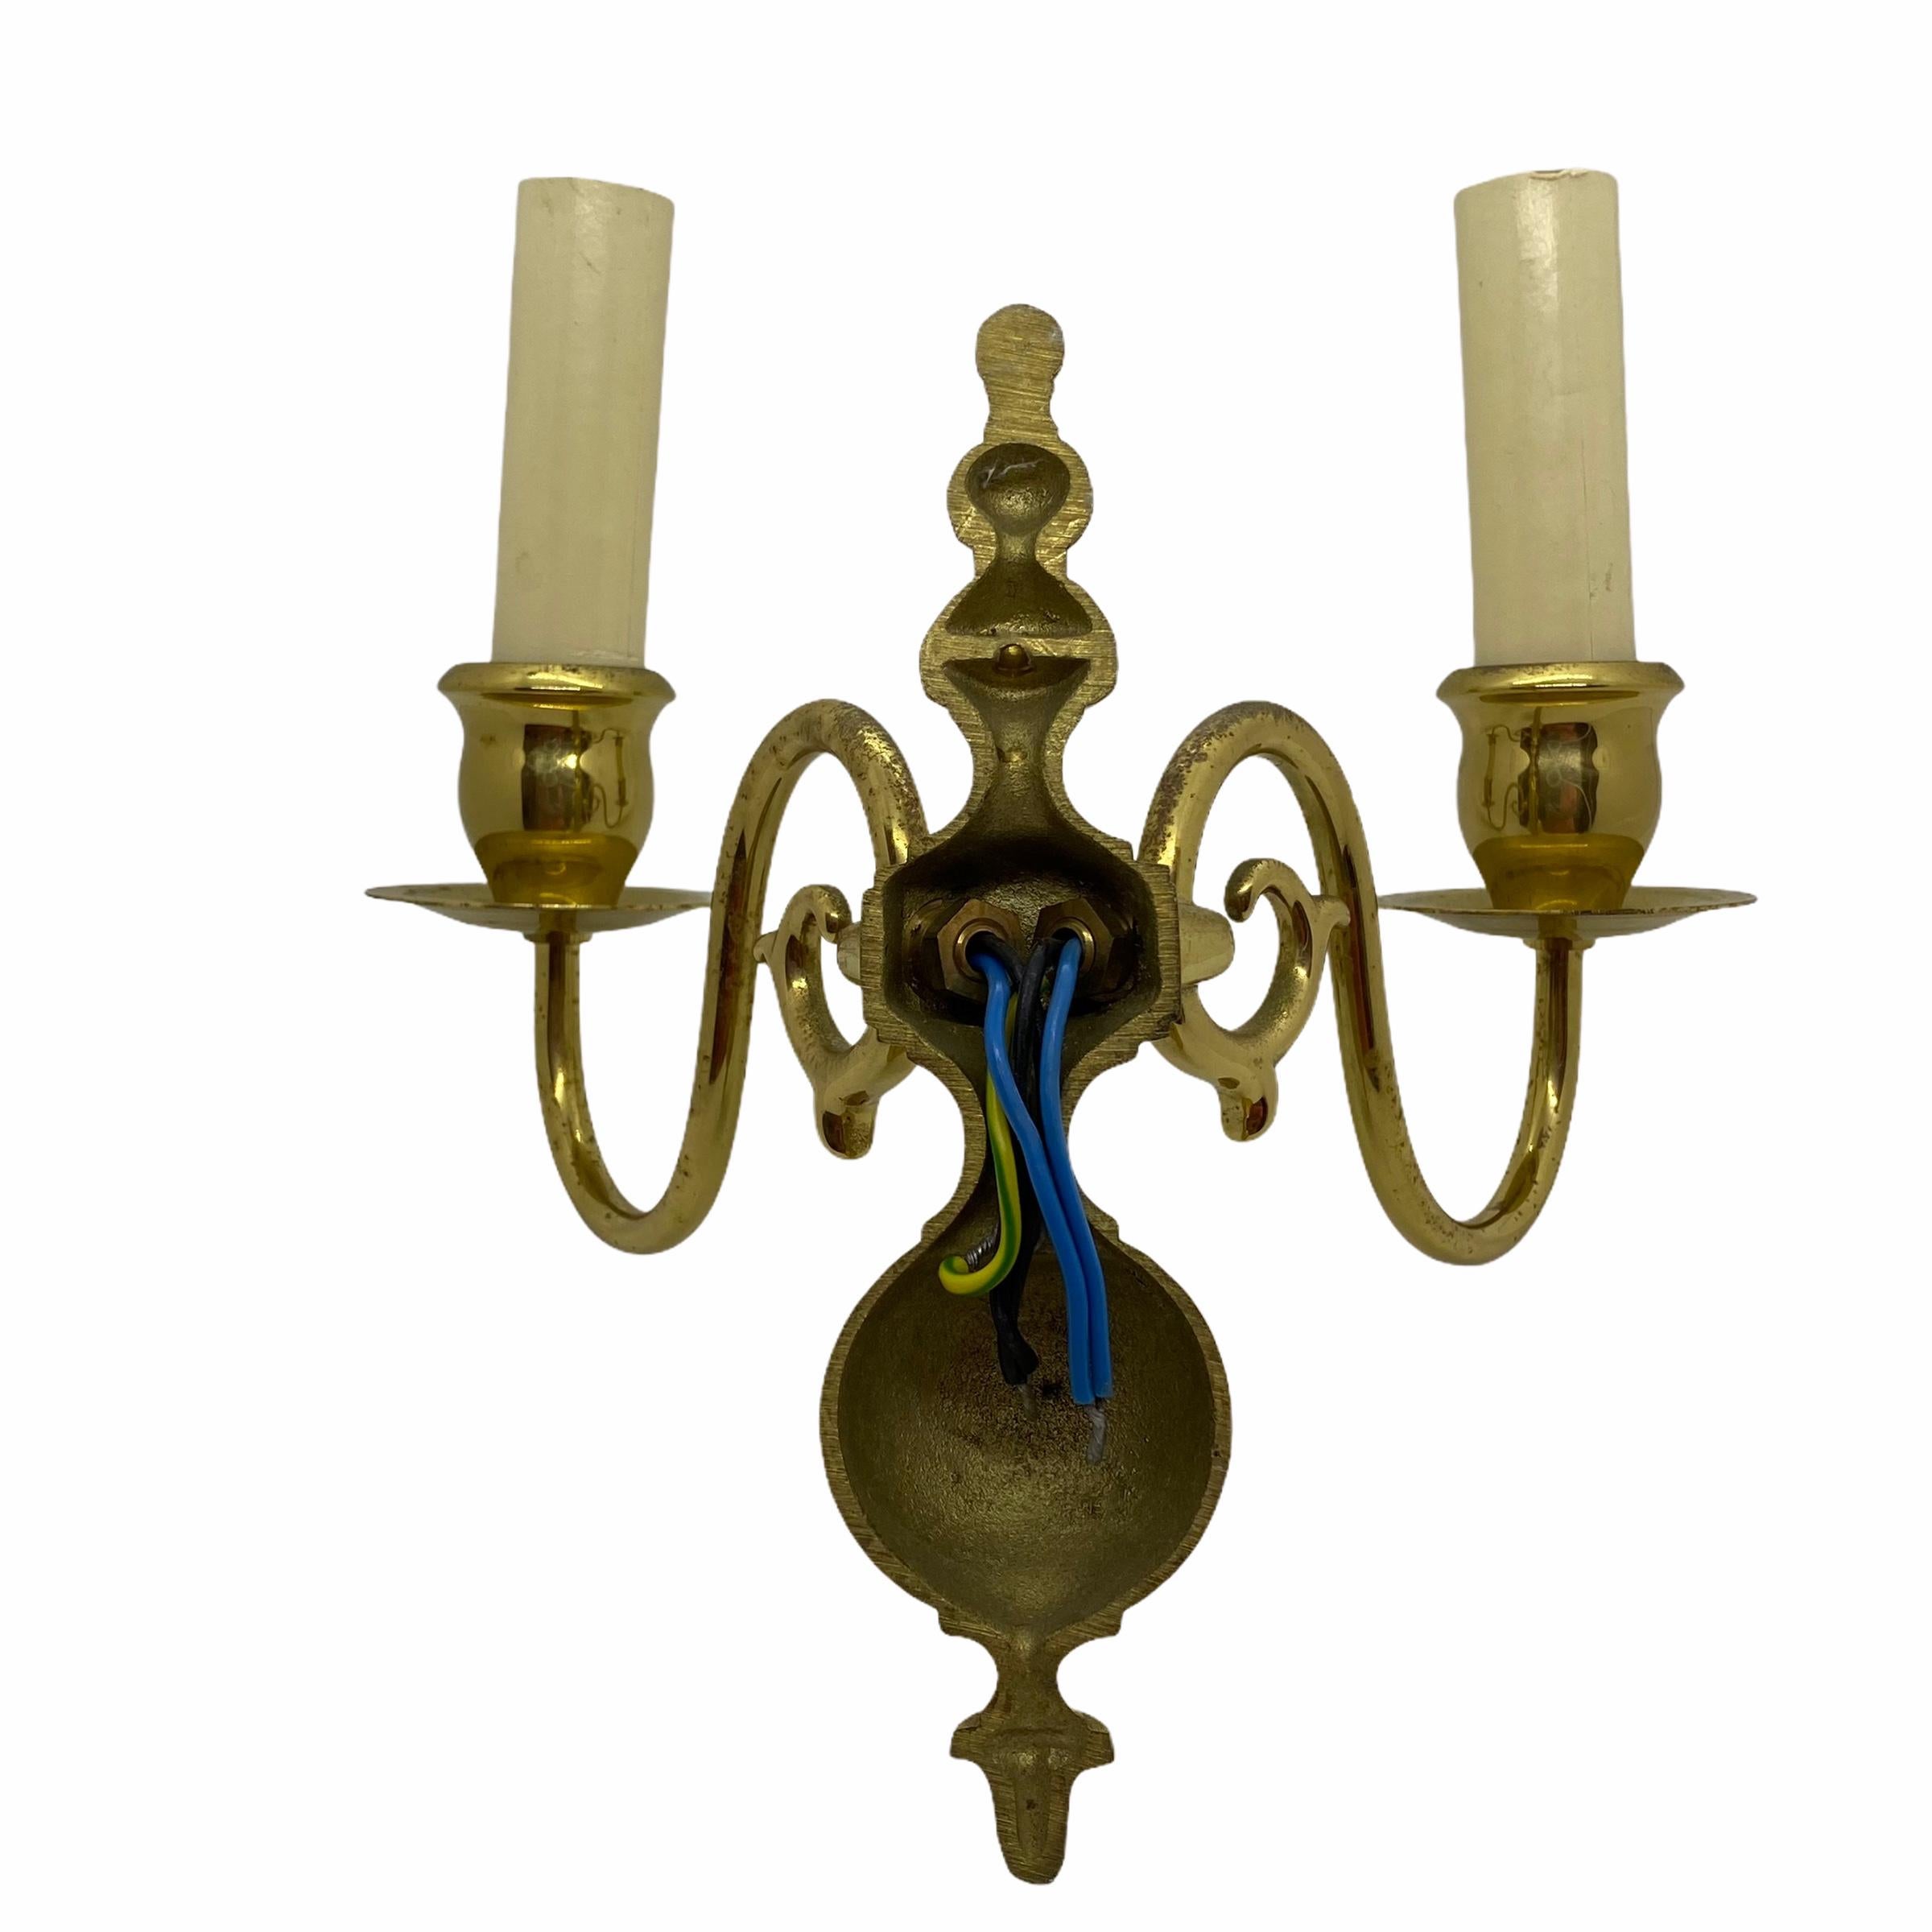 Pair of Solid Brass Two-Light Wall Sconces, Vintage, German, 1960s For Sale 1